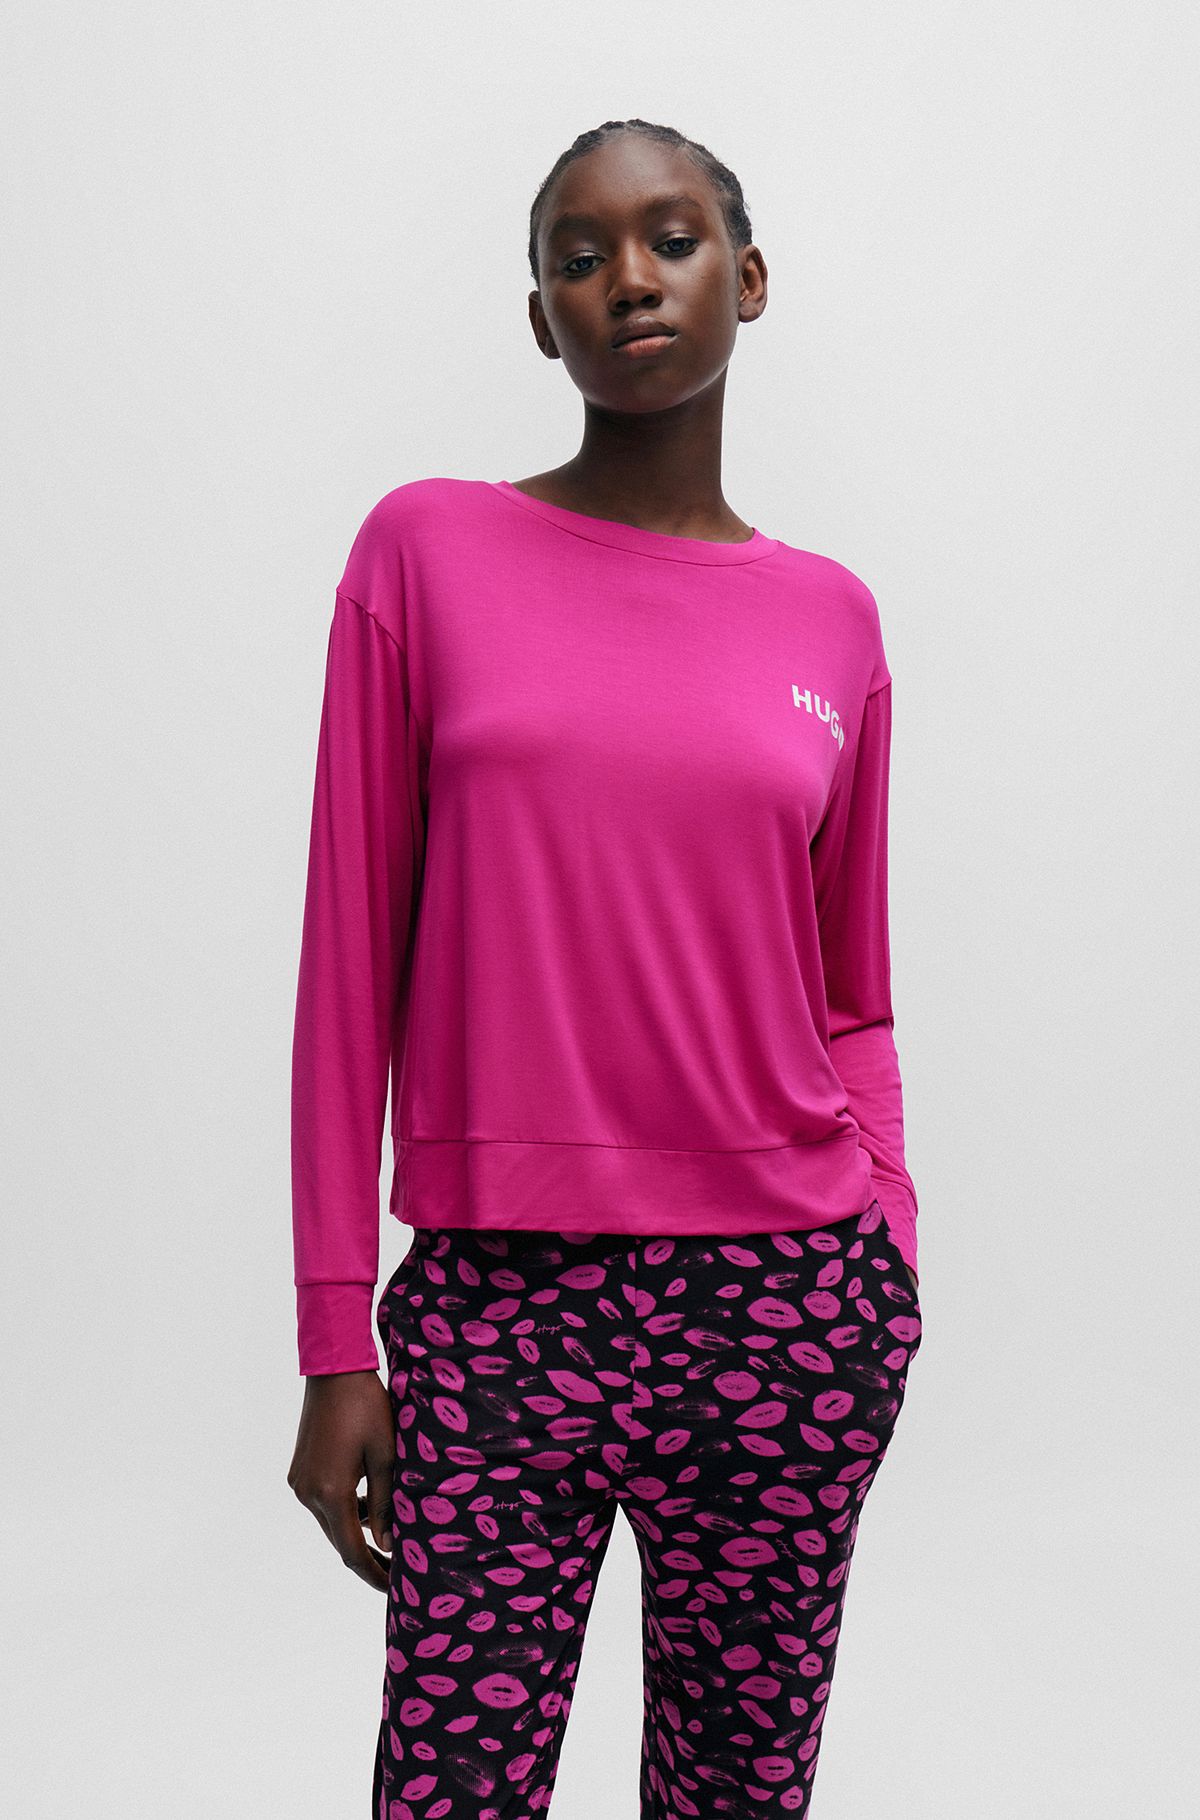 Relaxed-fit pyjama top with contrast logo, Dark pink